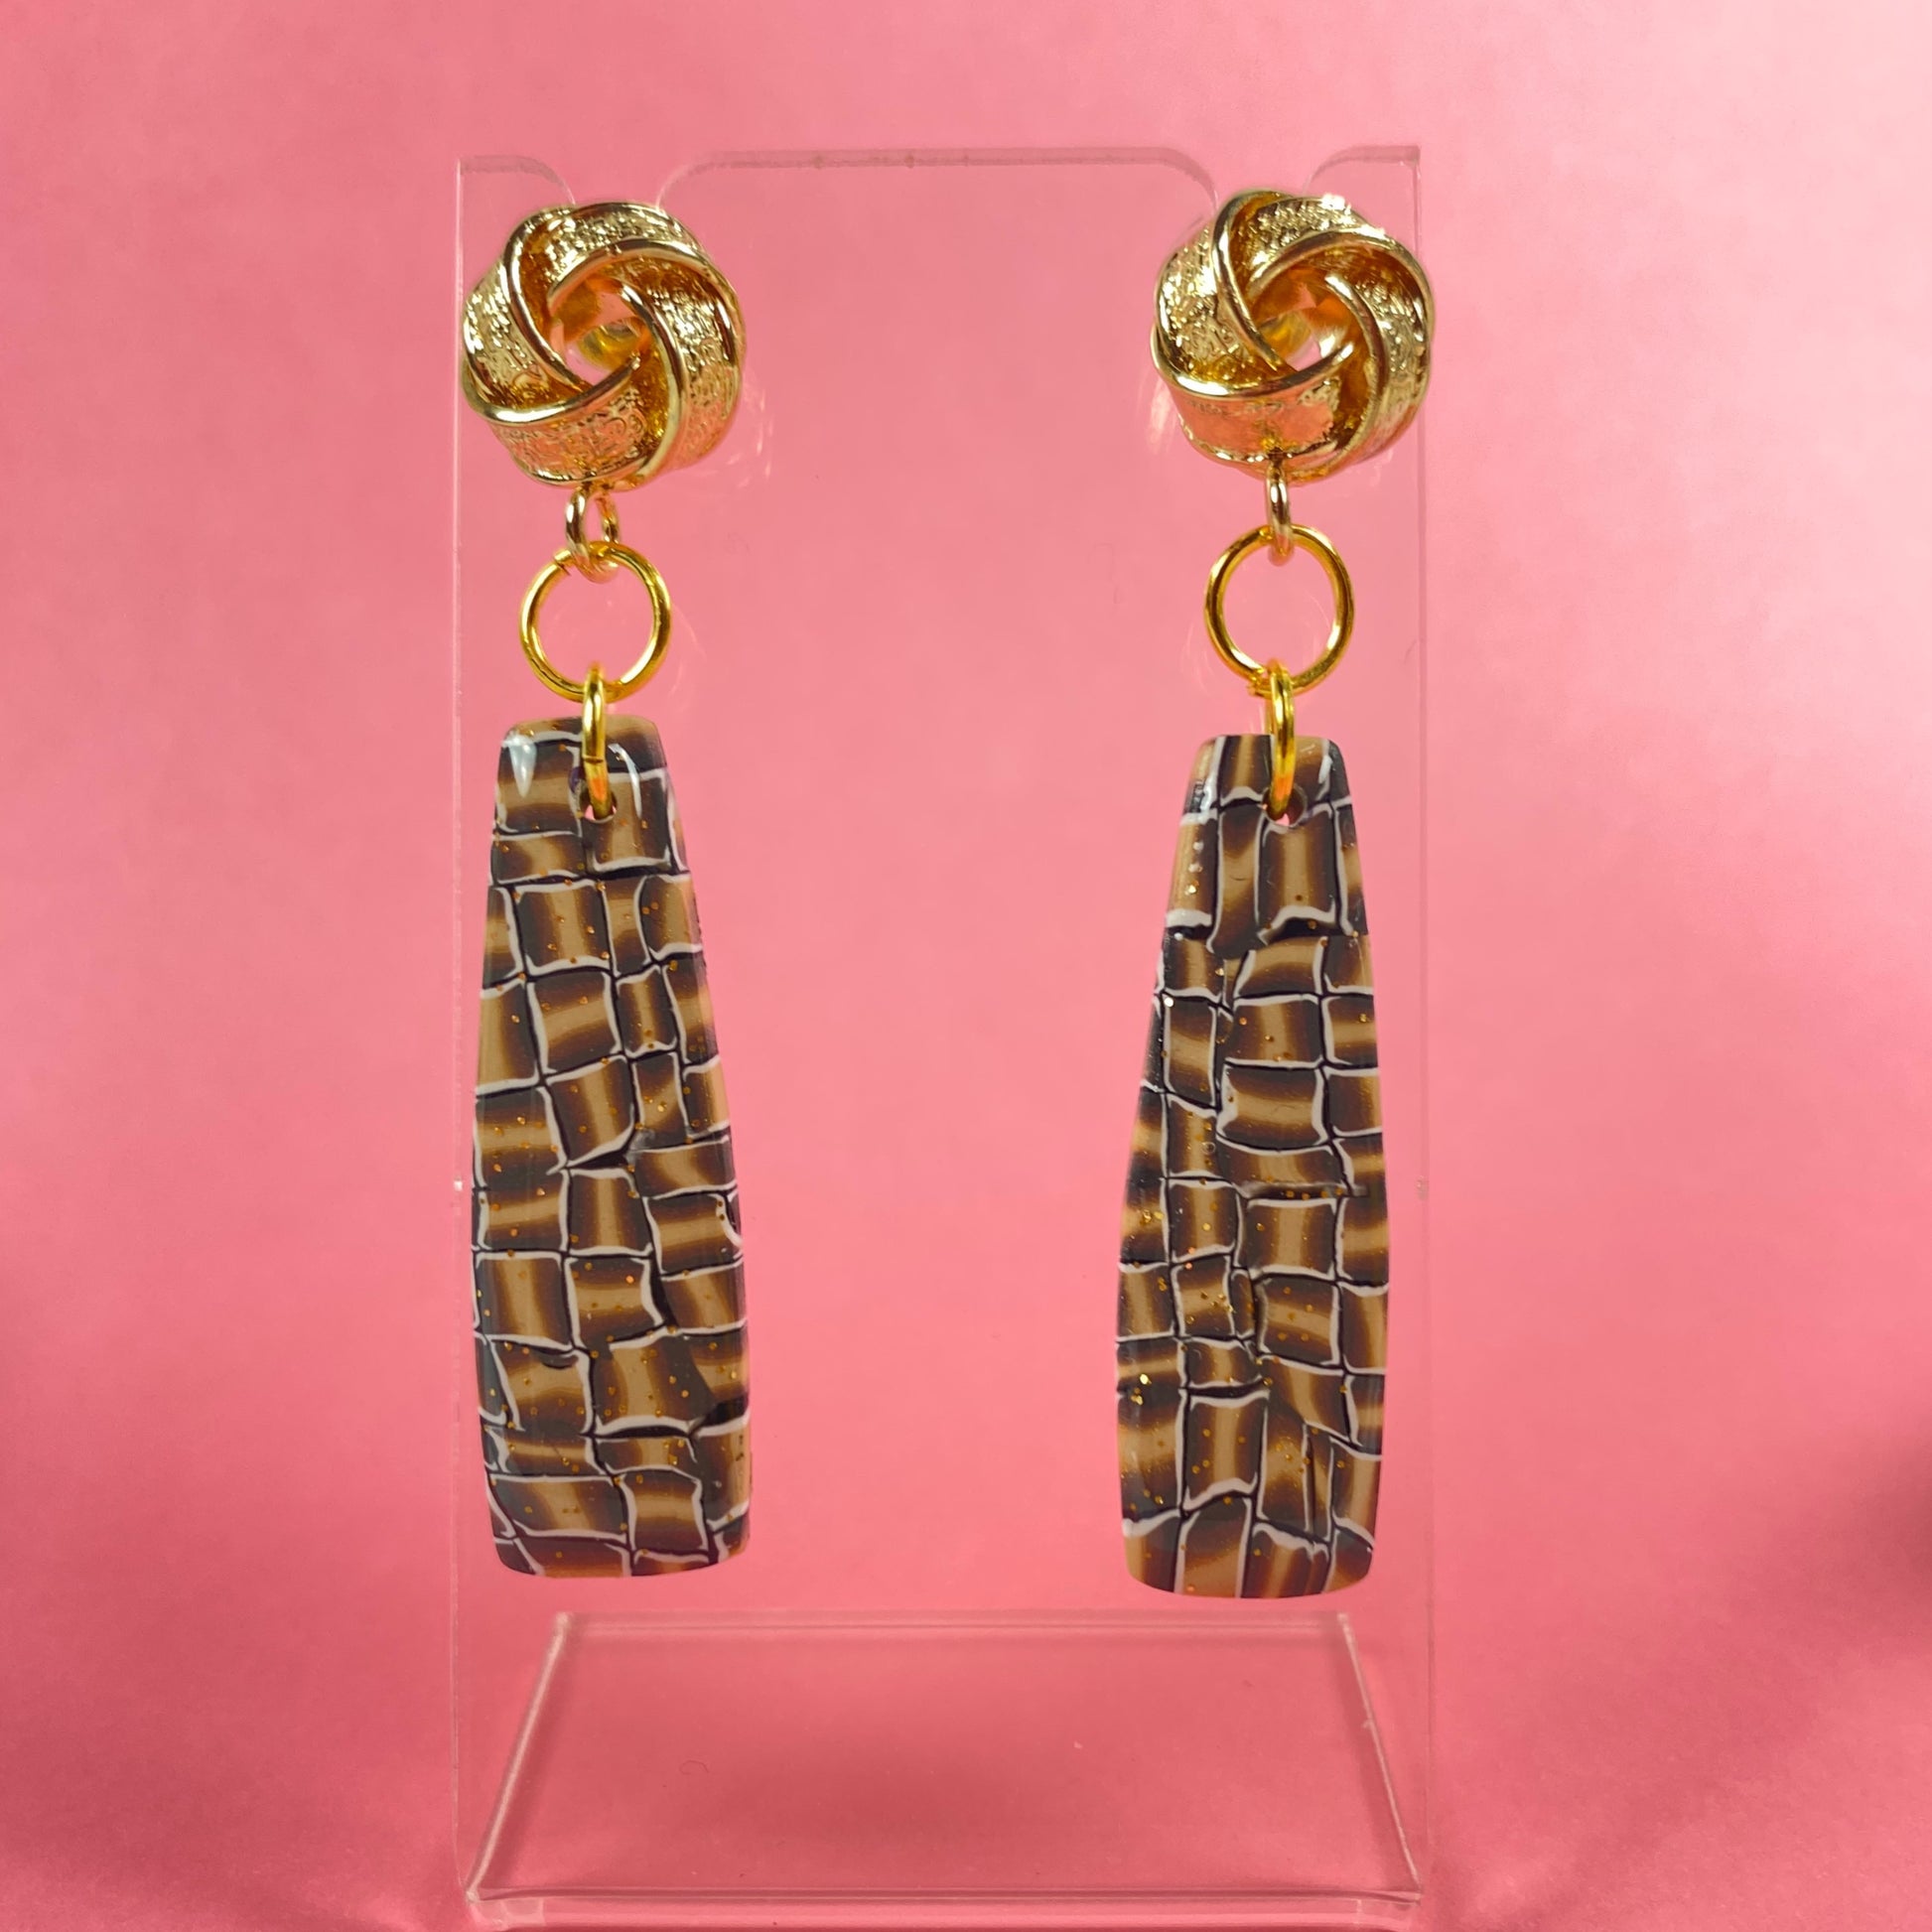 Golden Lattice Polymer Clay Handmade Dangle Earrings front view on pink background